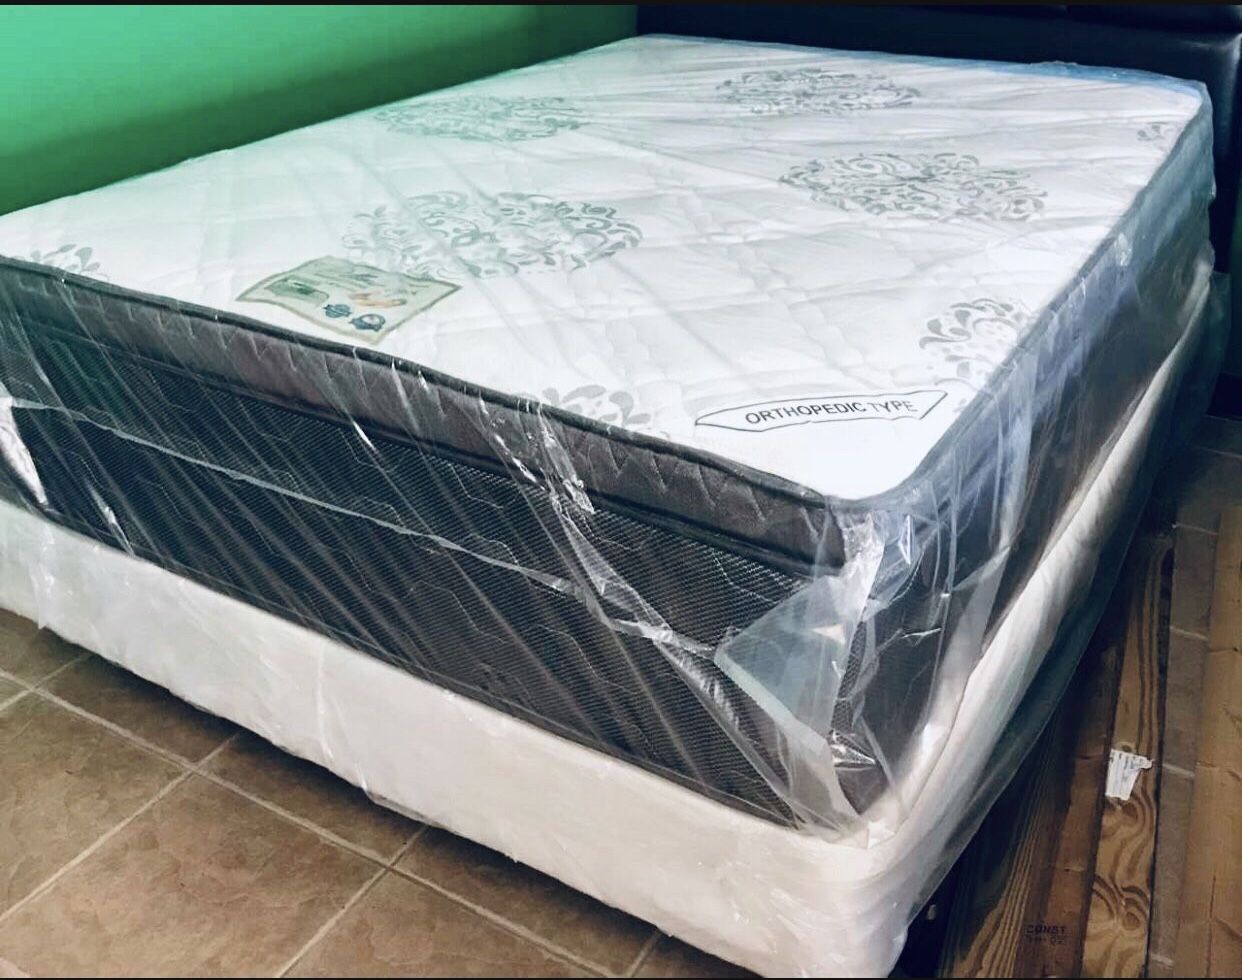 Mattress And Box! Queen Pillow Top Orthopedic Midium 13” Brand New Delivery 🚚 We Finance 